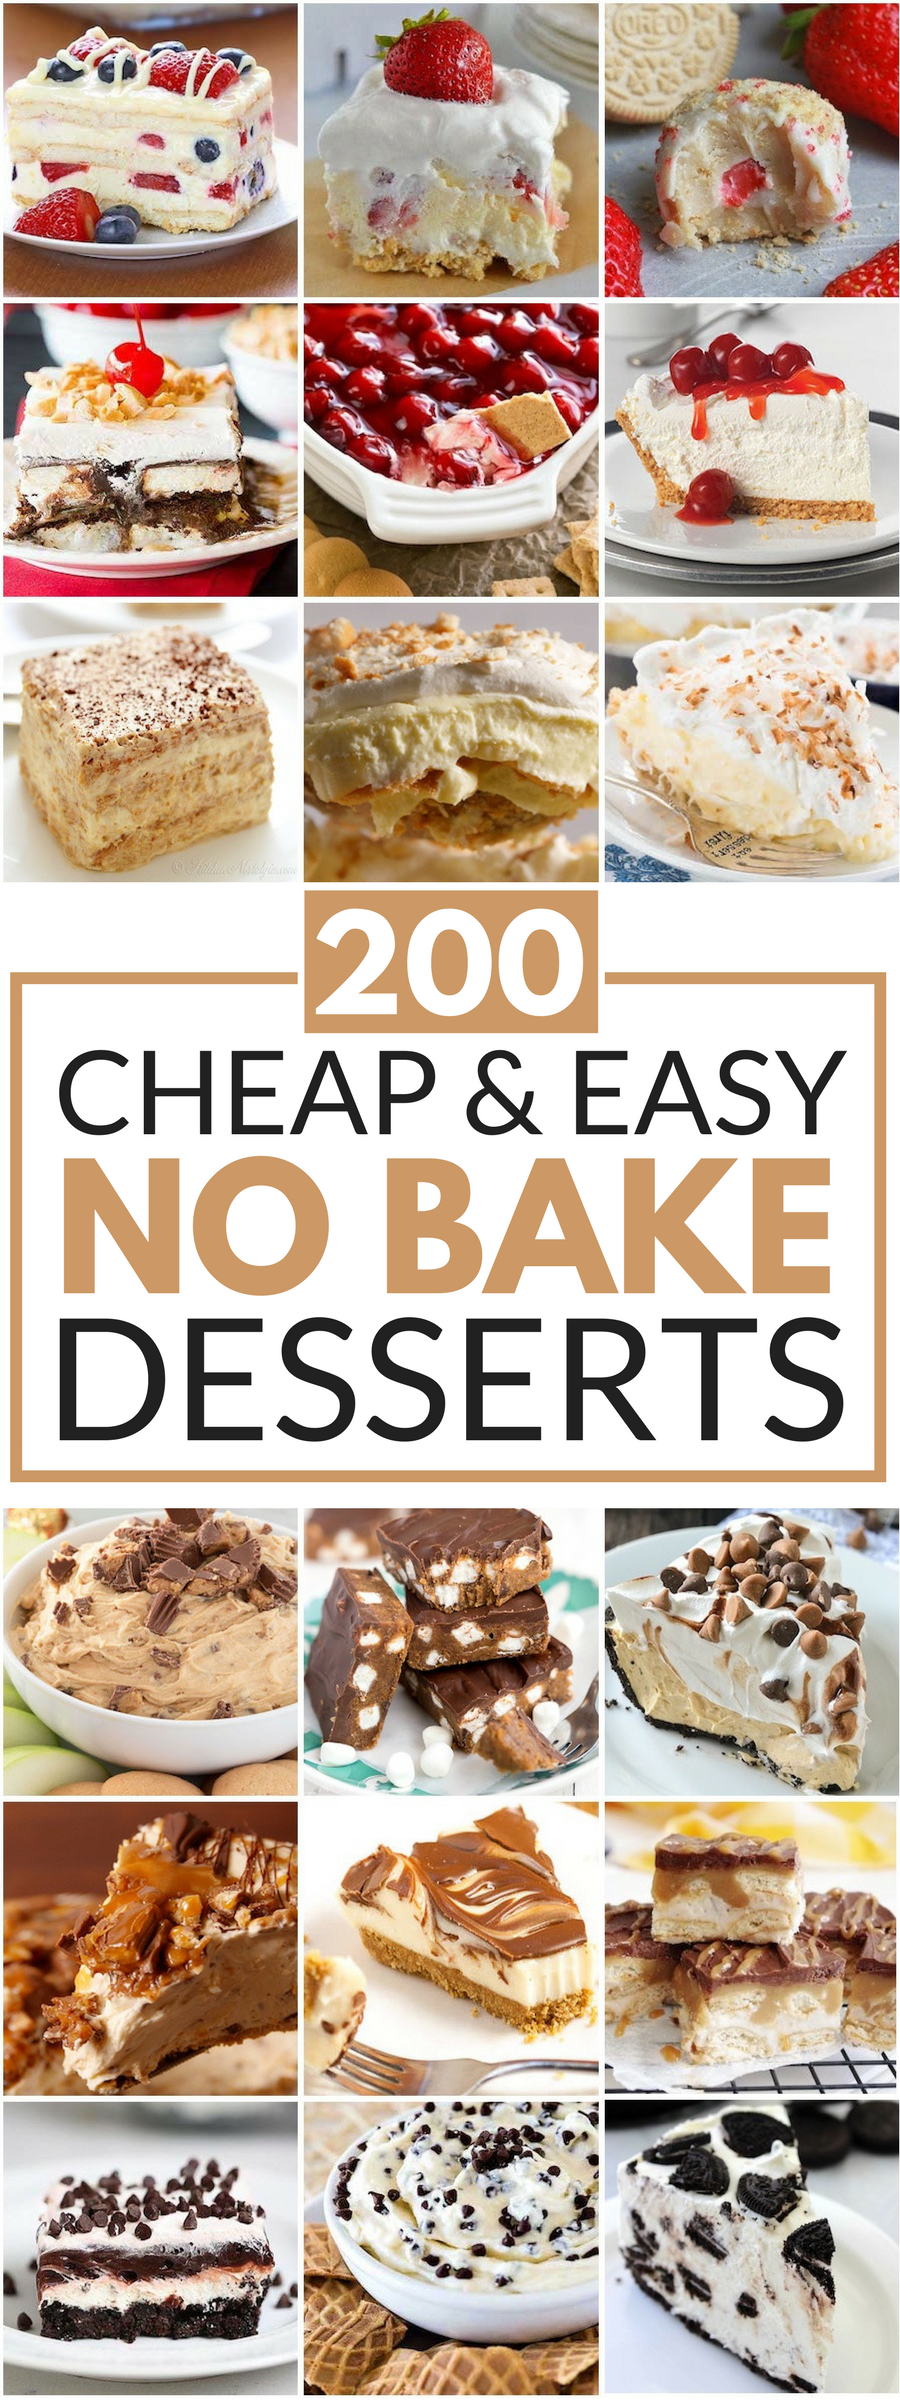 Pies -   200 Cheap and Easy No Bake Desserts